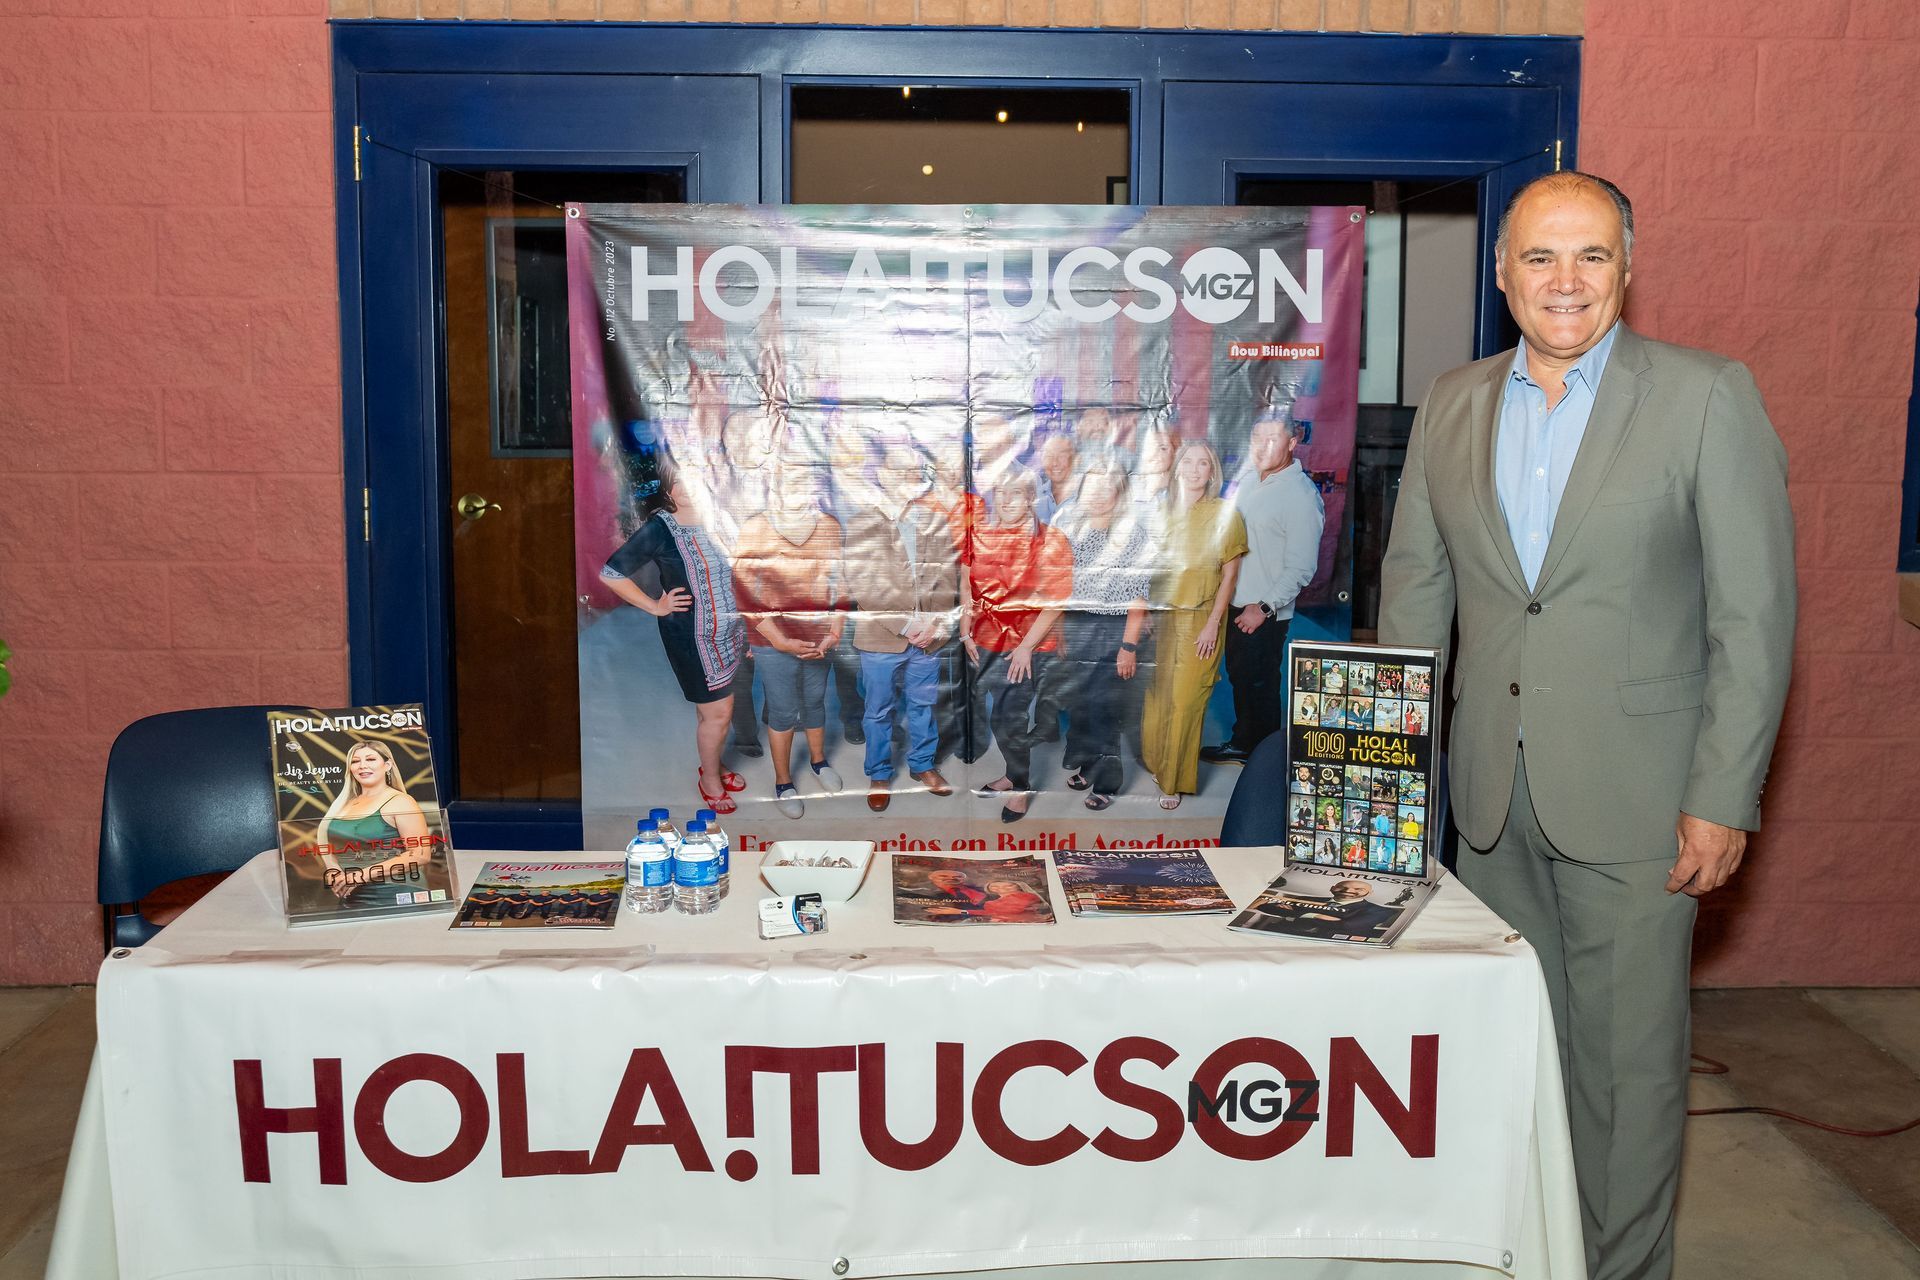 A man in a suit is standing in front of a table that says hola tucson